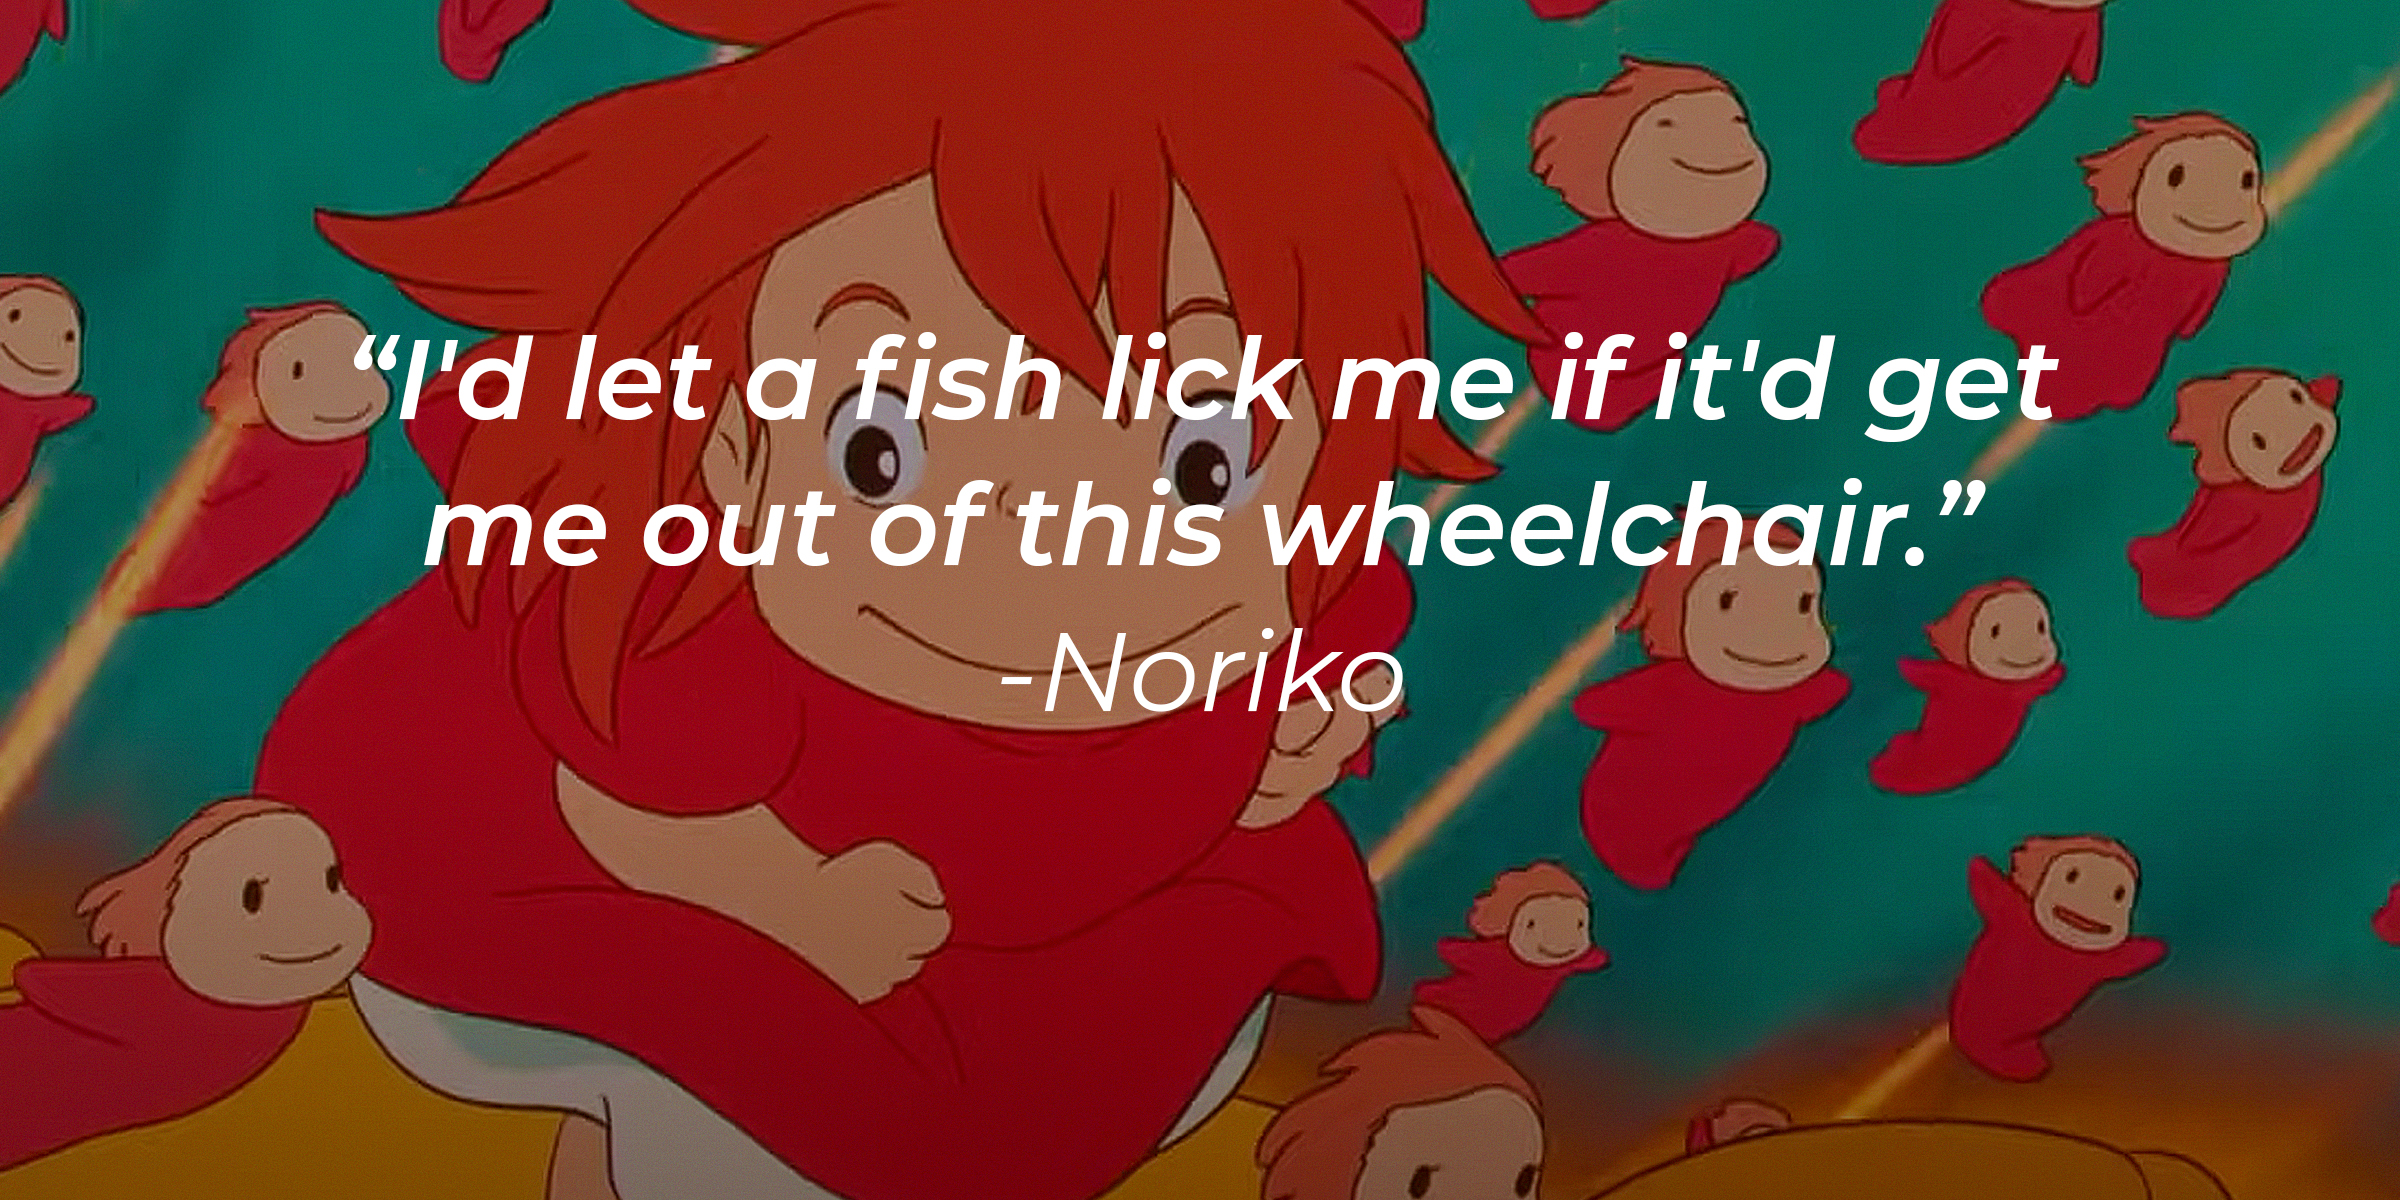 Photo of Ponyo with Noriko's quote: "I'd let a fish lick me if it'd get me out of this wheelchair." | Source: Youtube.com/crunchyrollstoreau